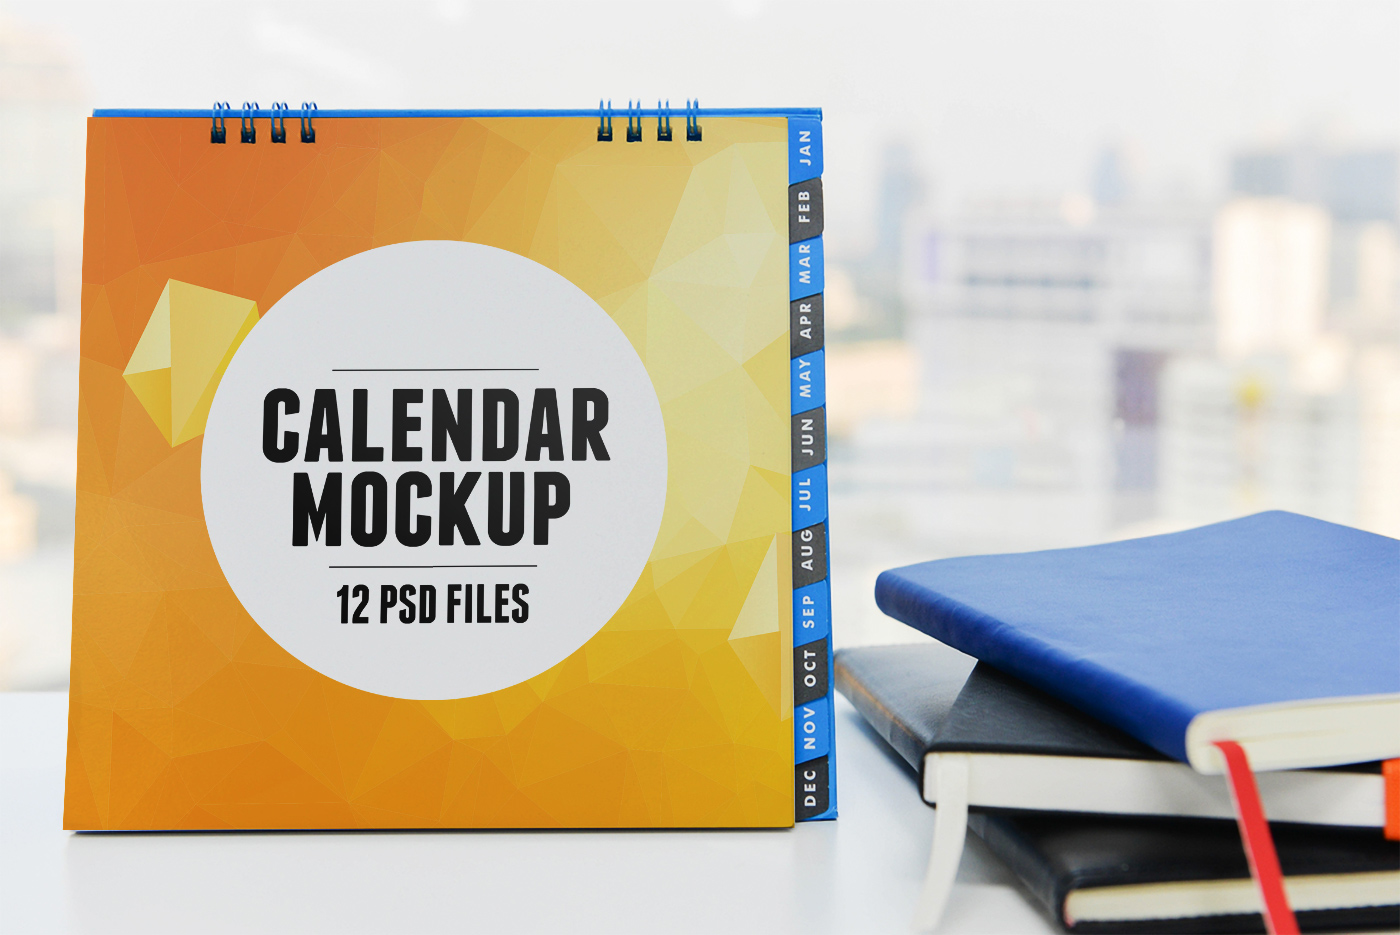 CALENDAR DATE DAY DESIGN DESK CALENDAR EVENT MOCK-UP MOCKUP MONTH NEW YEAR OFFICE PAGE PAPER PRINT SHADOWS TABLE CALENDAR TEMPLATE STATIONERY business calendar year